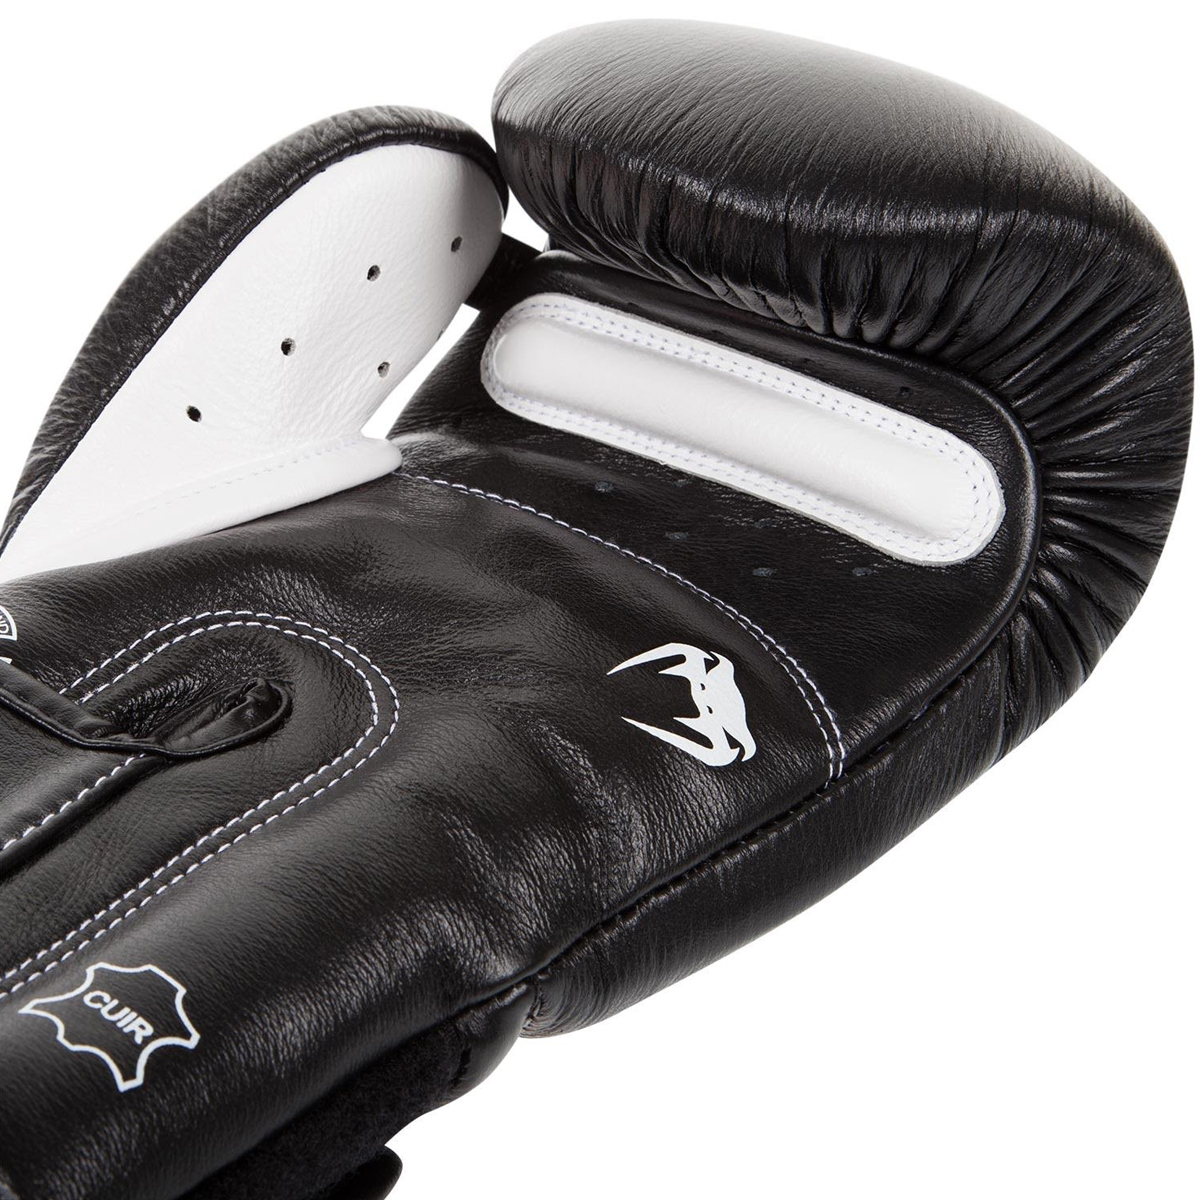 Venum Giant 3.0 Nappa Leather Hook and Loop Boxing Gloves - 12 oz. - Black/White - image 4 of 5